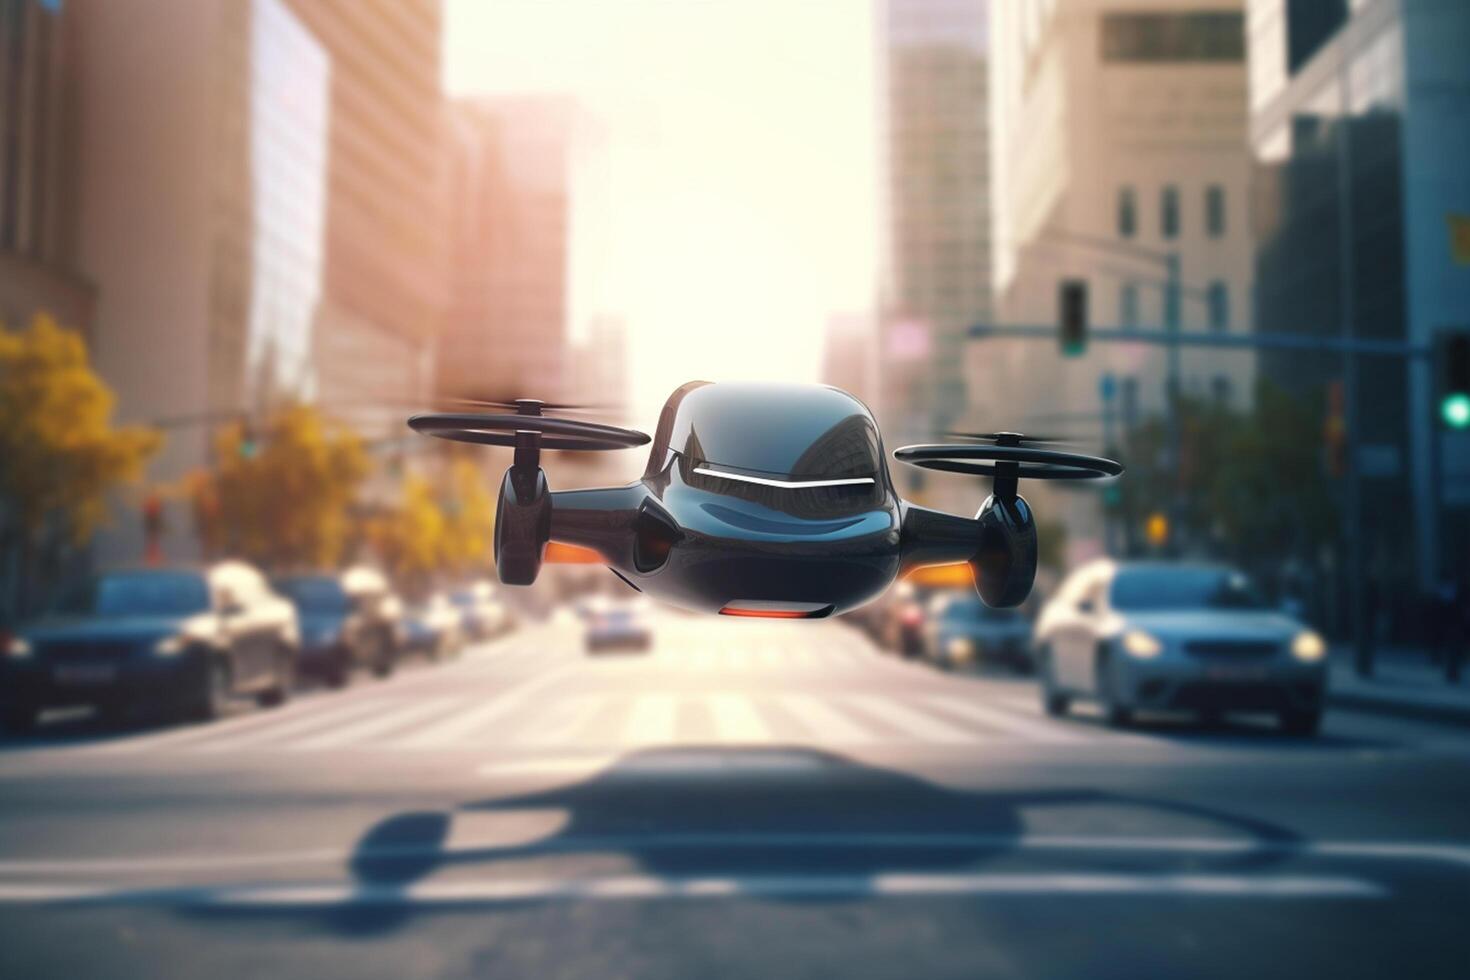 Flying Cars in the City A Futuristic AI-Powered Concept Illustration photo